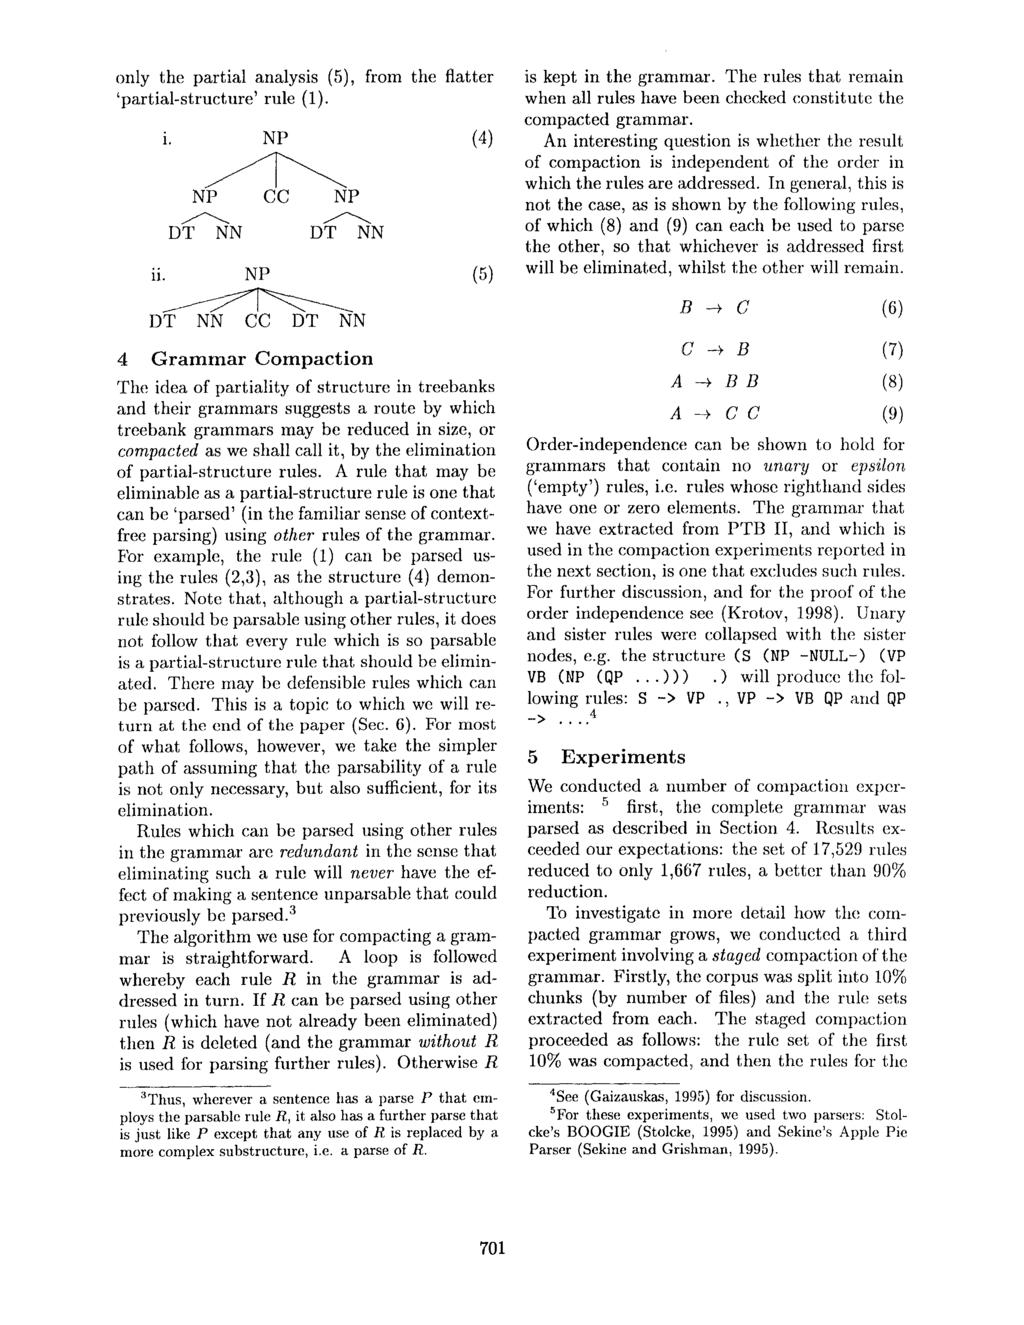 only the partial analysis (5), from the flatter 'partial-structure' rule (1). ii